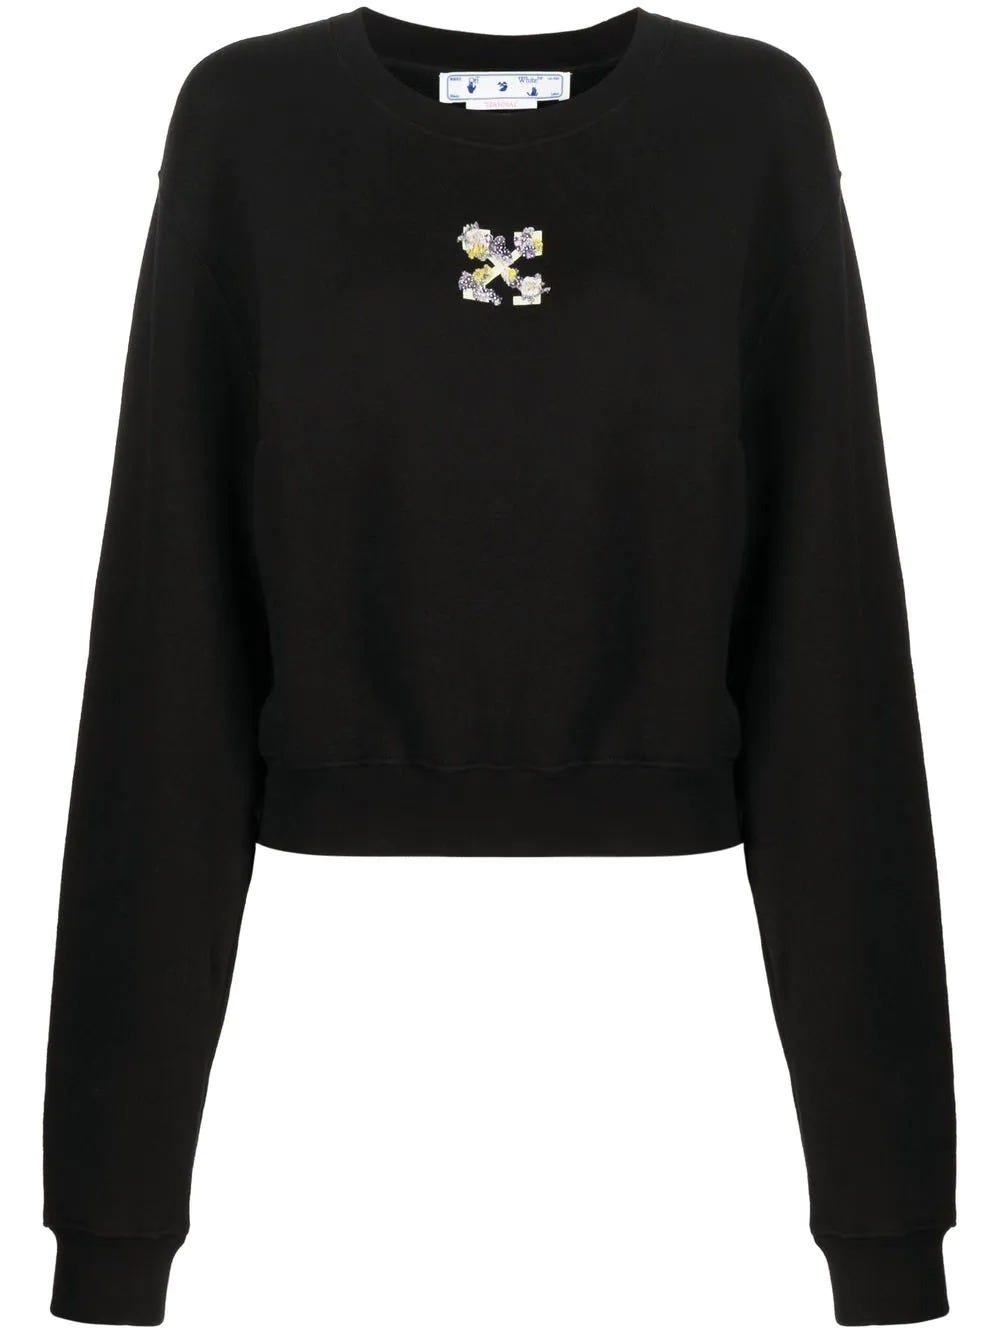 OFF-WHITE BLACK LONG-SLEEVED SWEATSHIRT WITH FLORAL ARROW MOTIF